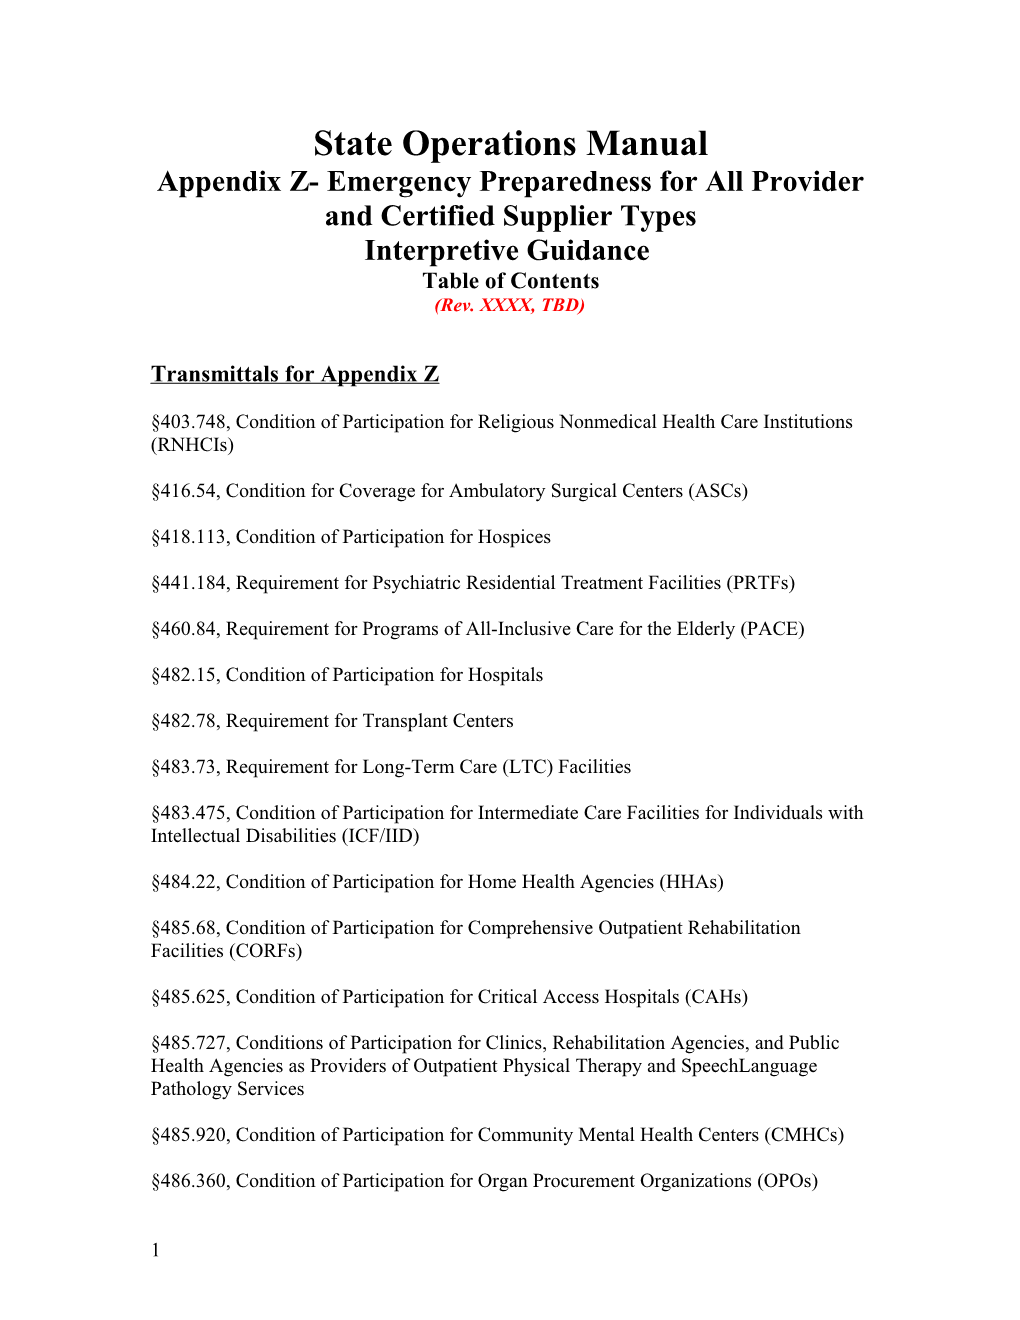 Appendix Z- Emergency Preparedness for All Provider and Certified Supplier Types